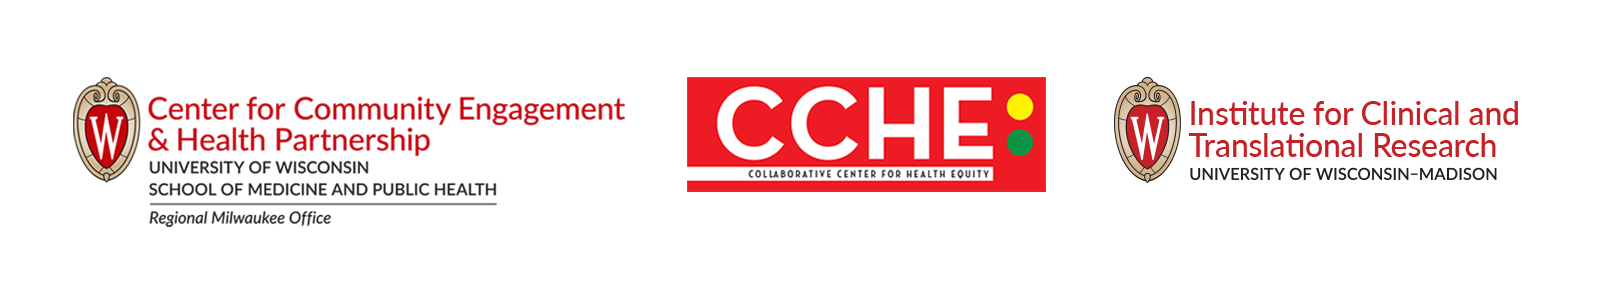 Center for Community Engagement and Health Partnership logos